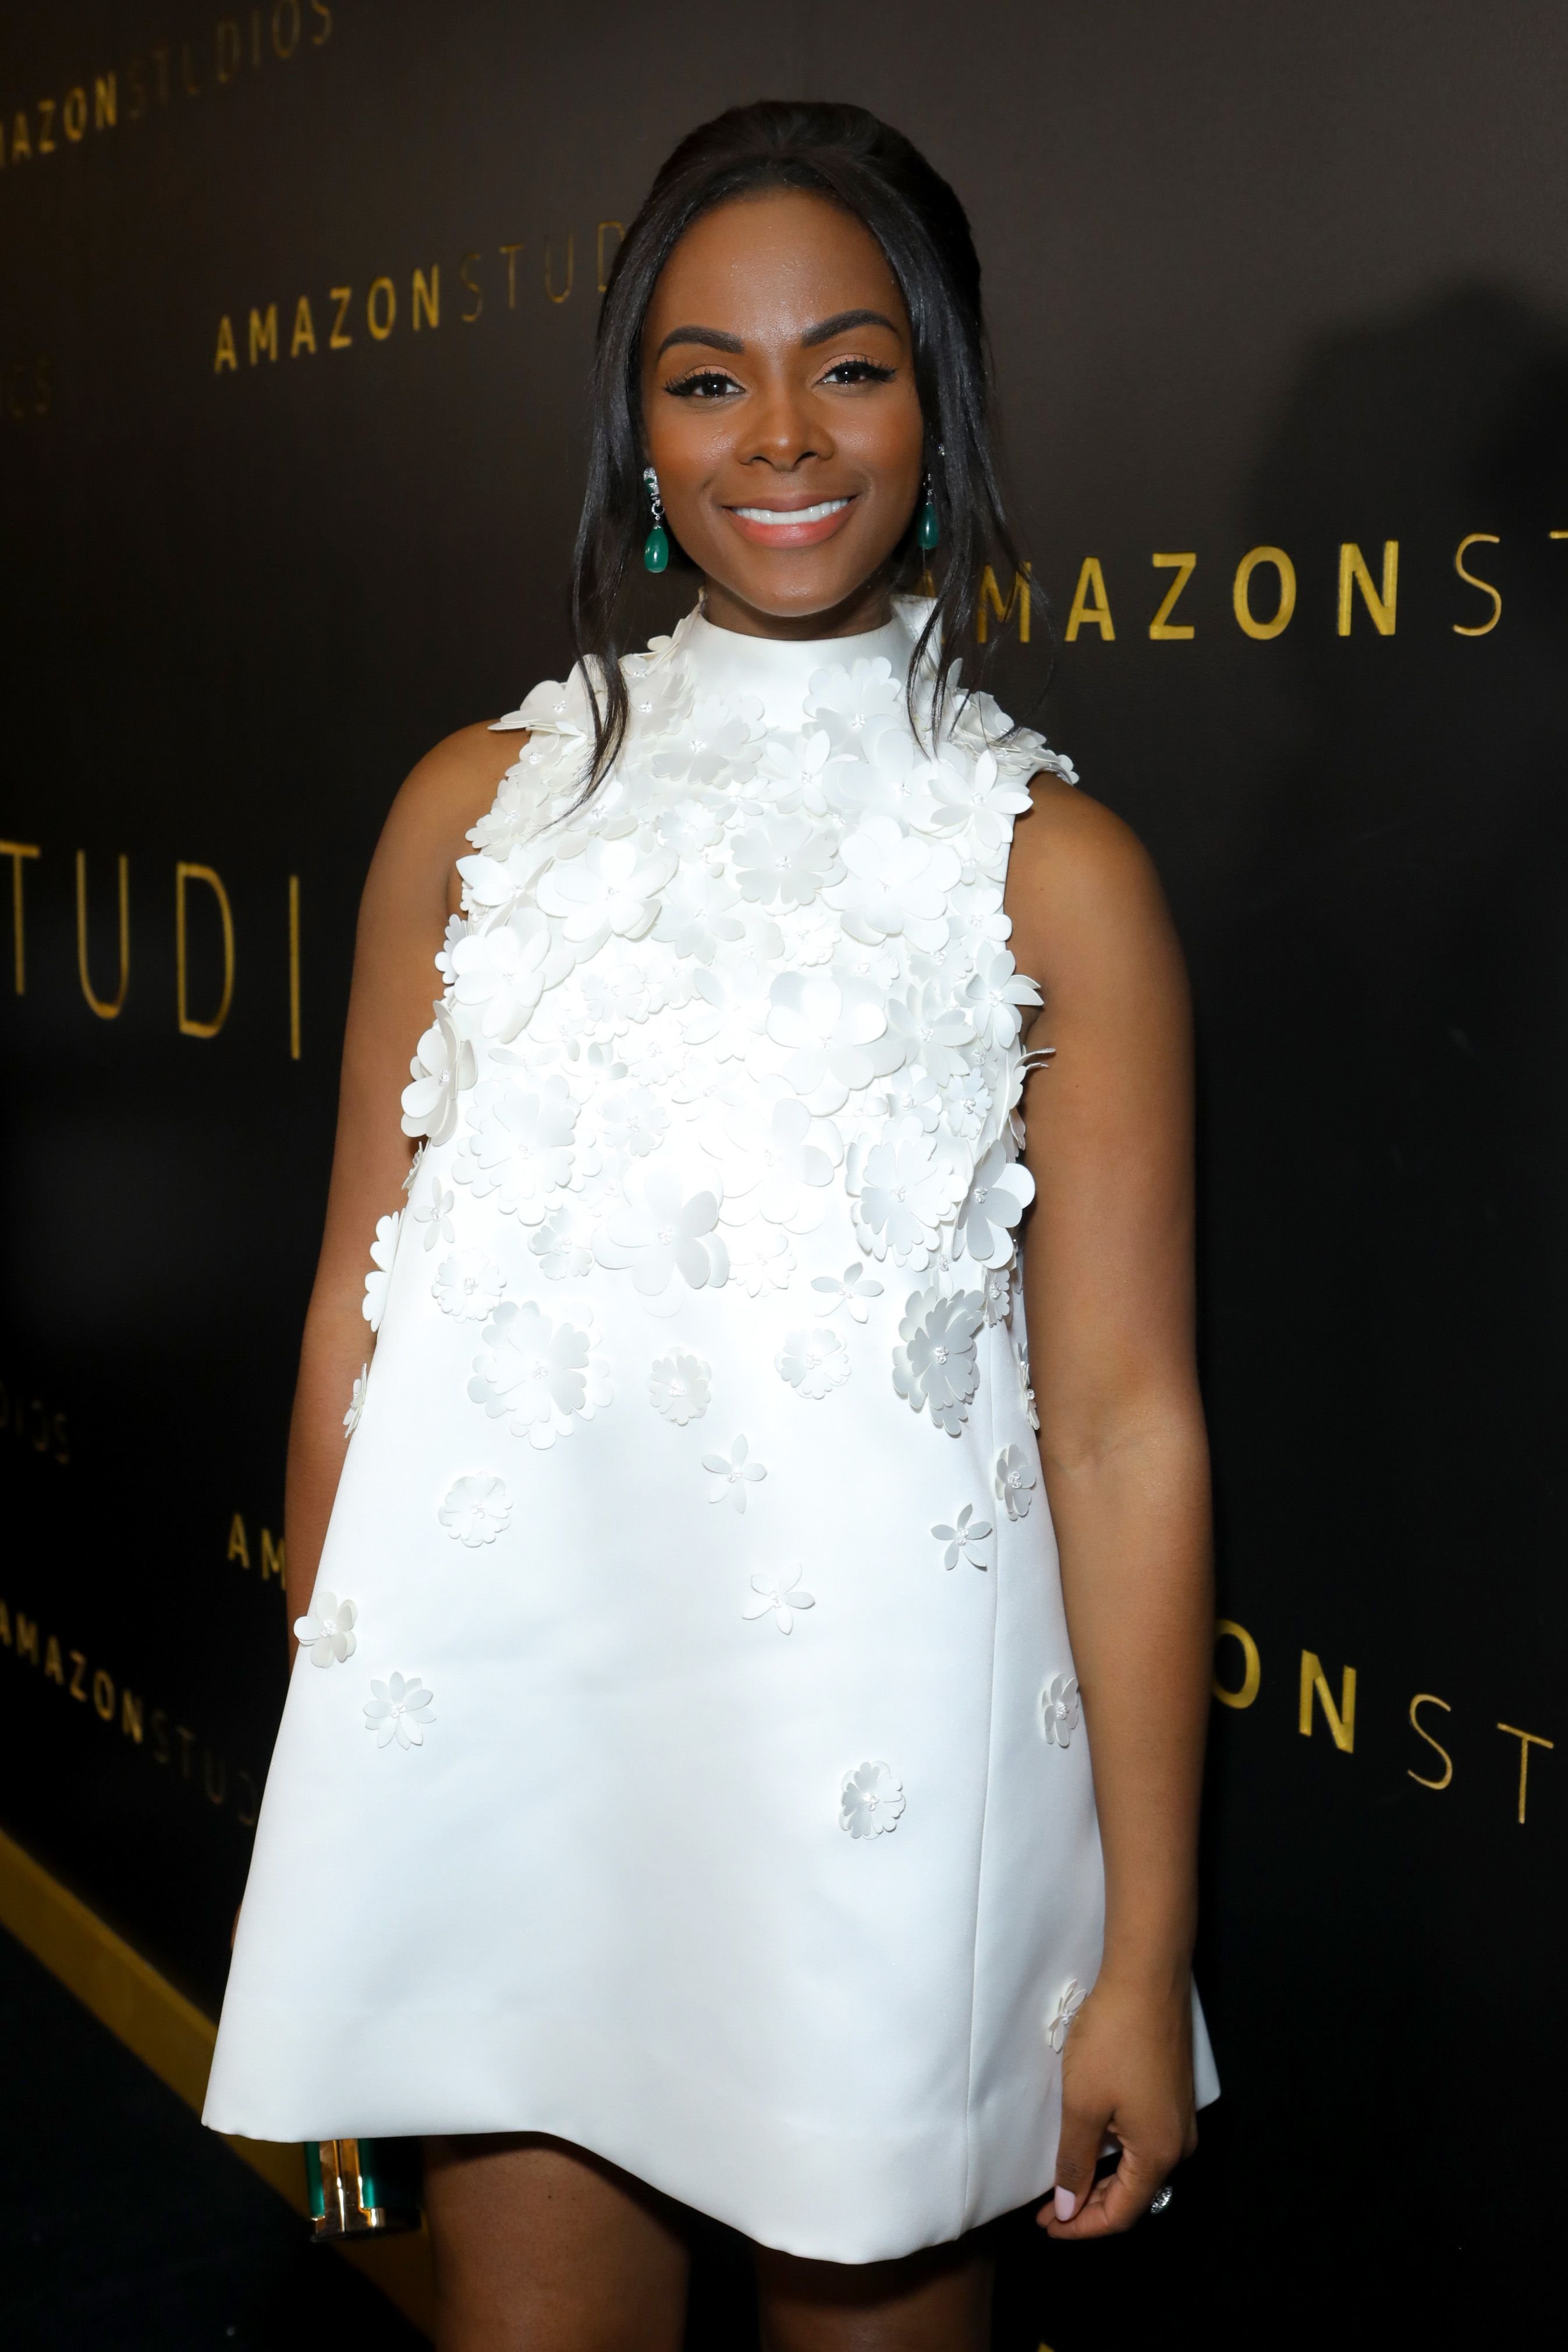 Tika Sumpter at the Golden Globe Awards after-party on January 6, 2019 in Beverly Hills. | Photo: Getty Images